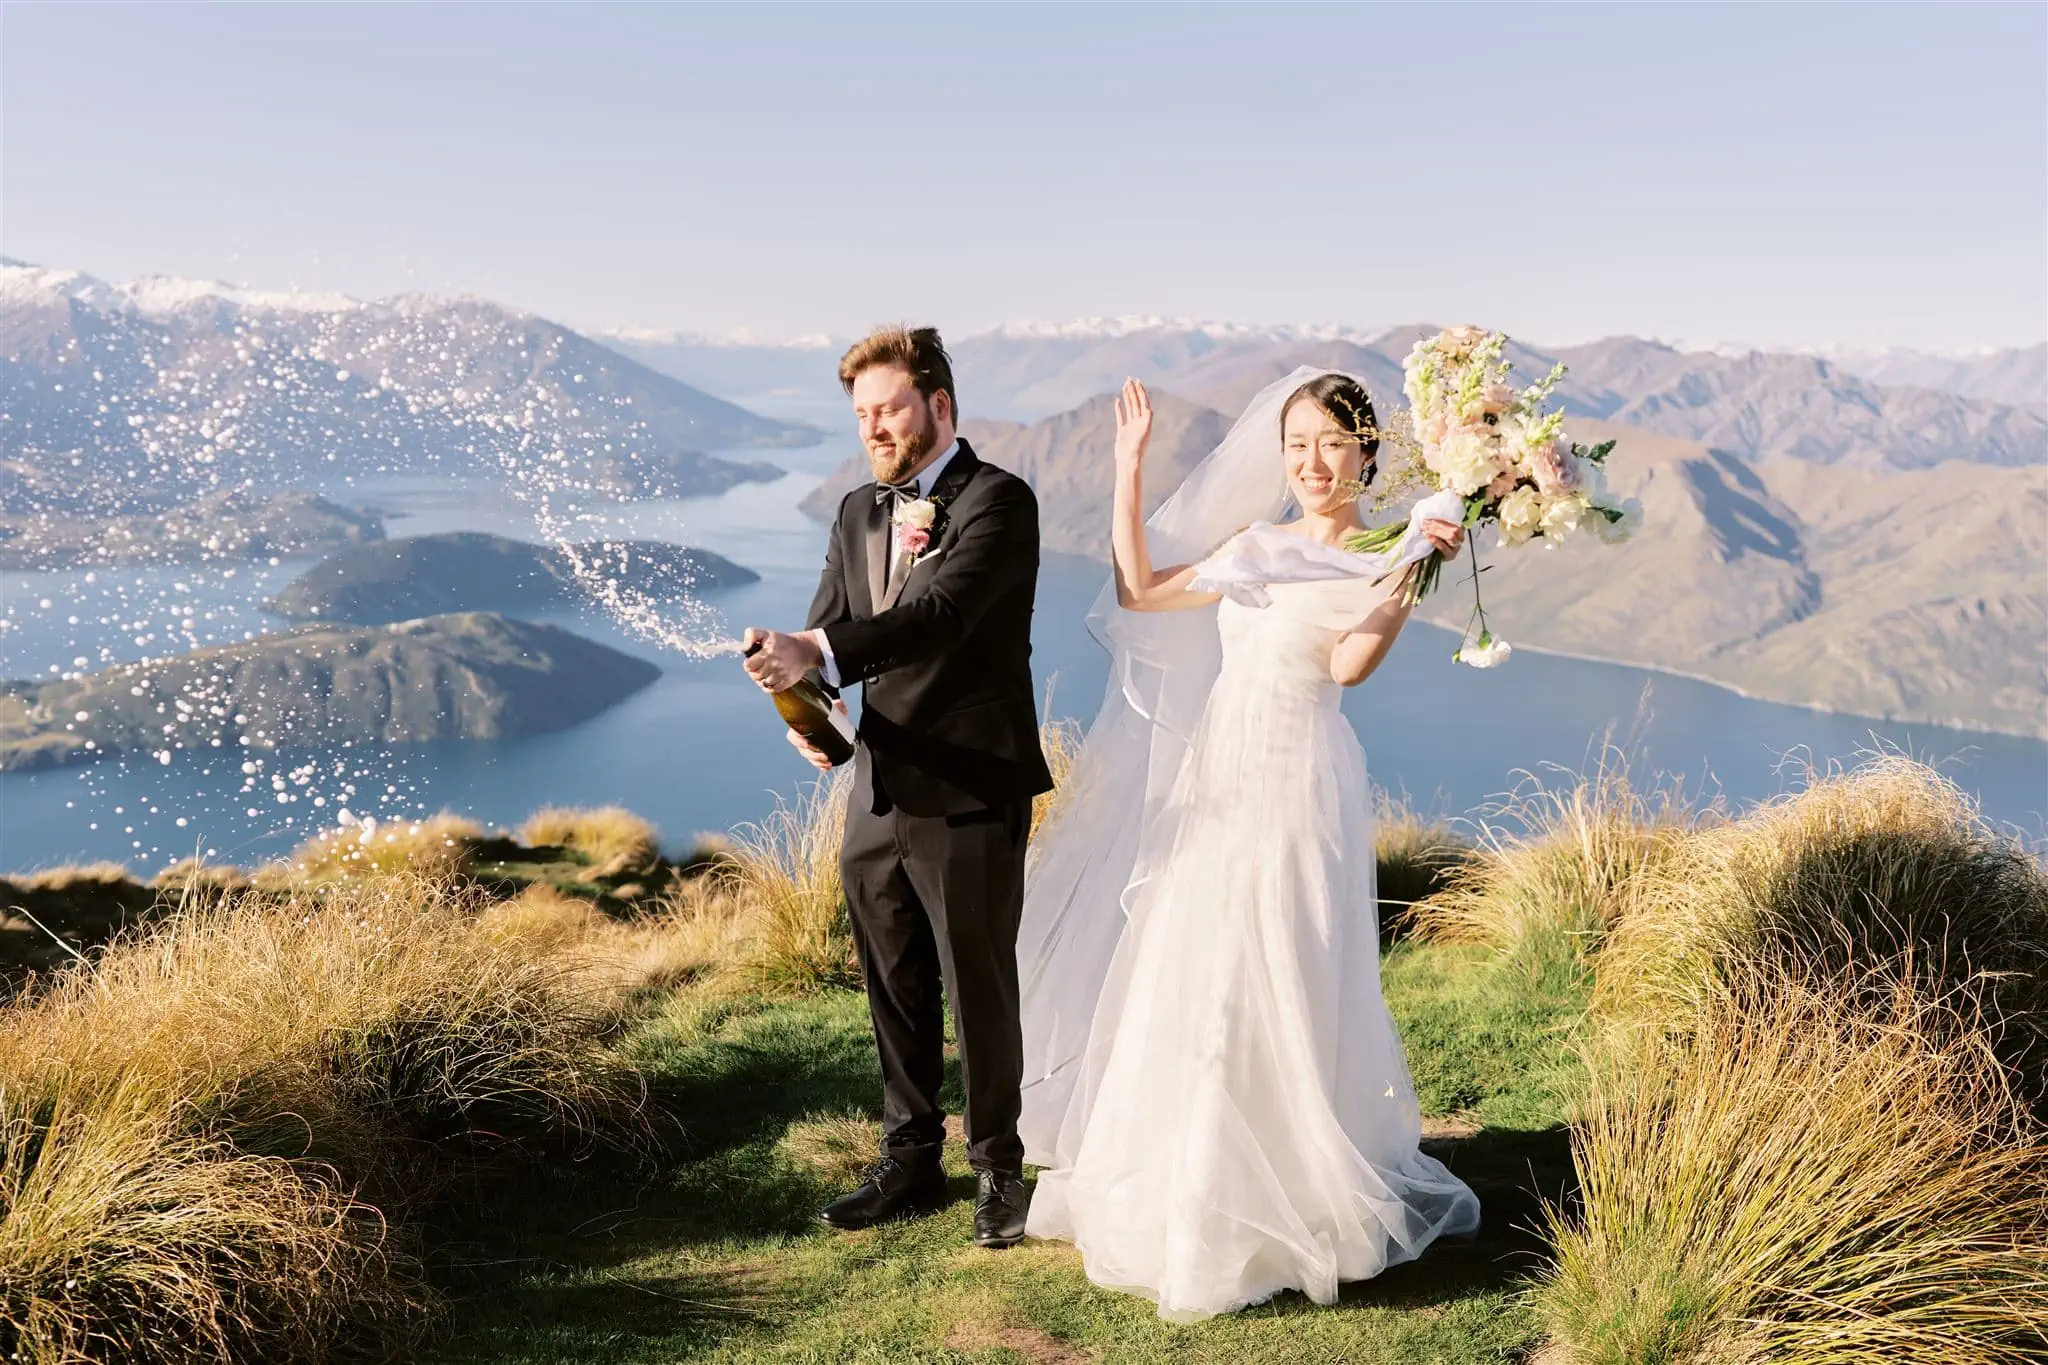 Queenstown New Zealand Elopement Wedding Photographer - A bride and groom celebrating their wedding on top of a mountain in Queenstown, New Zealand with the heli-wedding package.